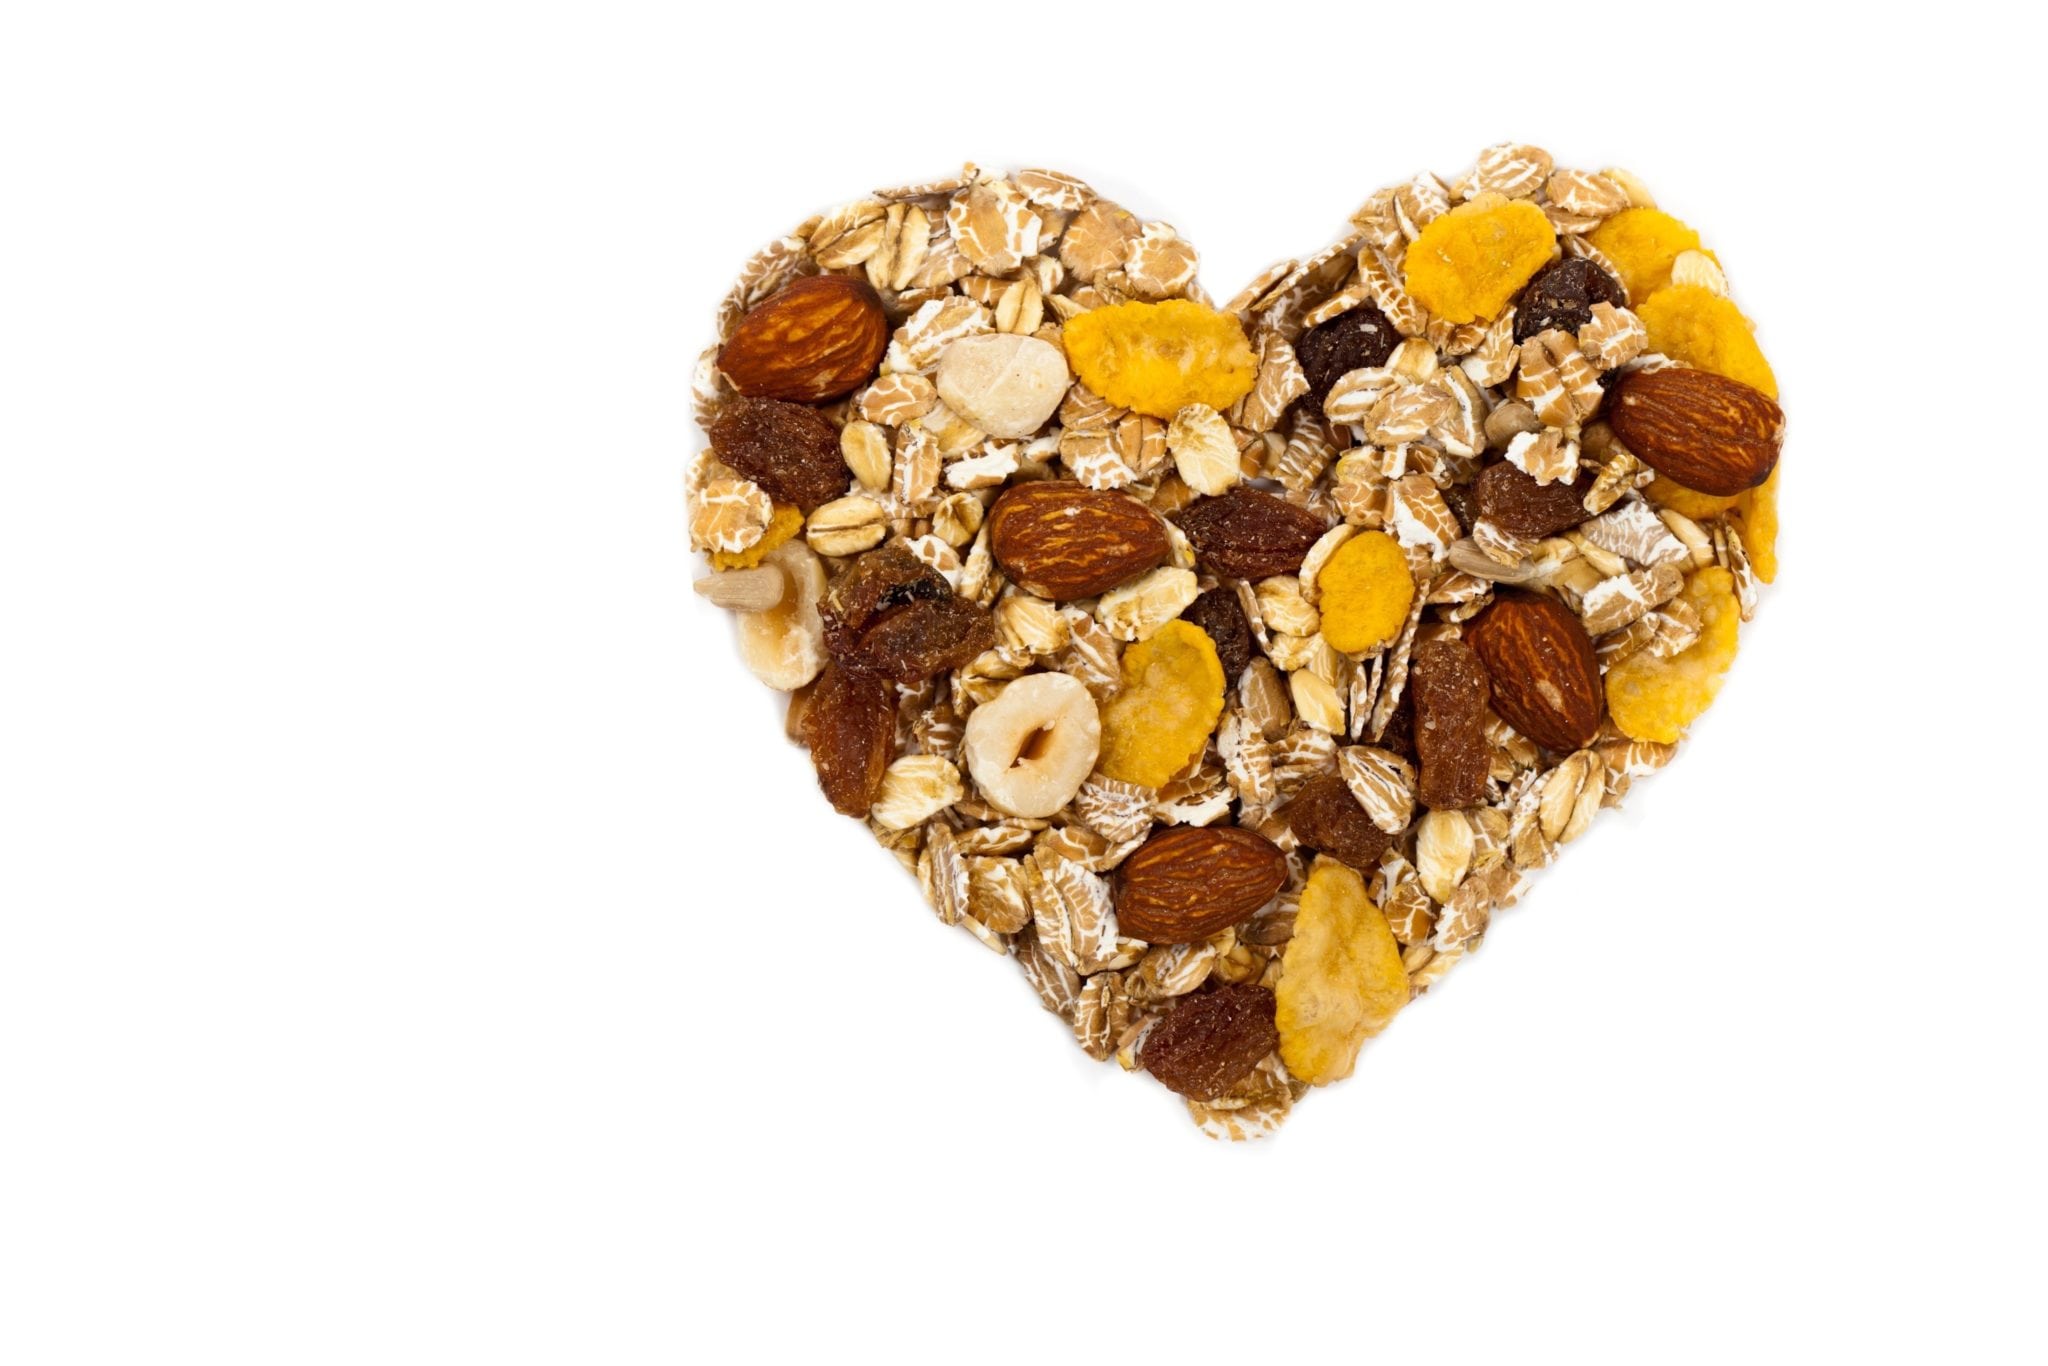 10 Heart-Healthy Snacks for American Heart Month